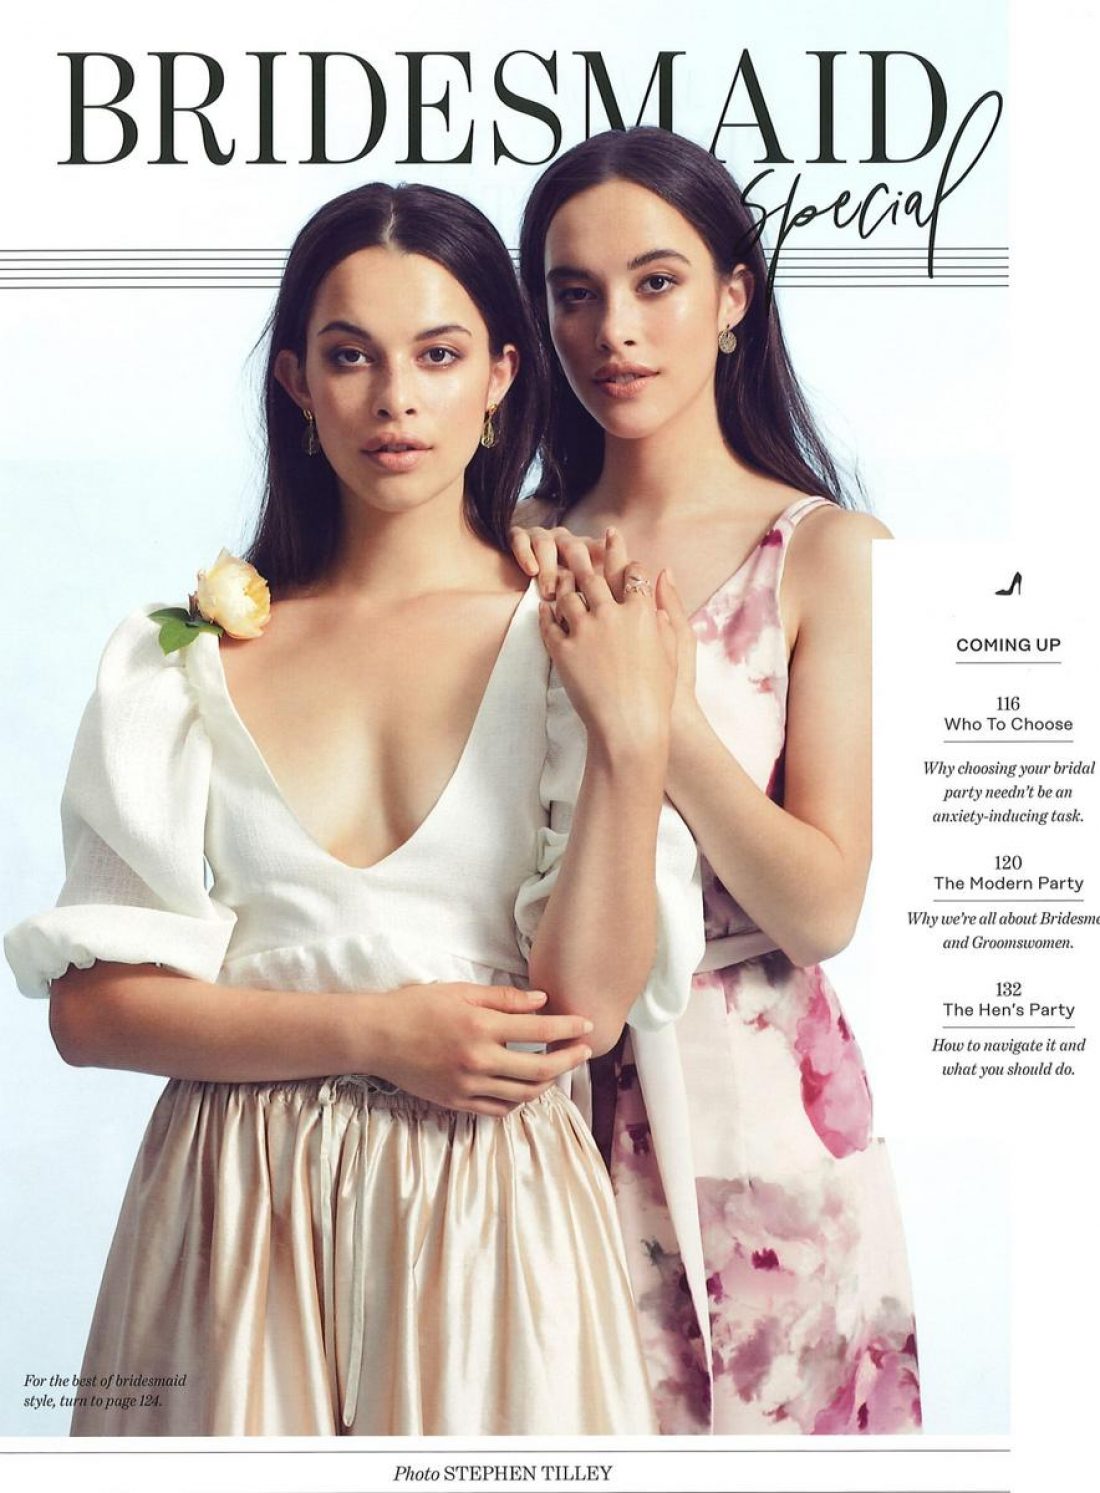 Charlee & Jaclyn photographed by Stephen Tilley for NZ weddings Magazine; styling Ana MacDonald